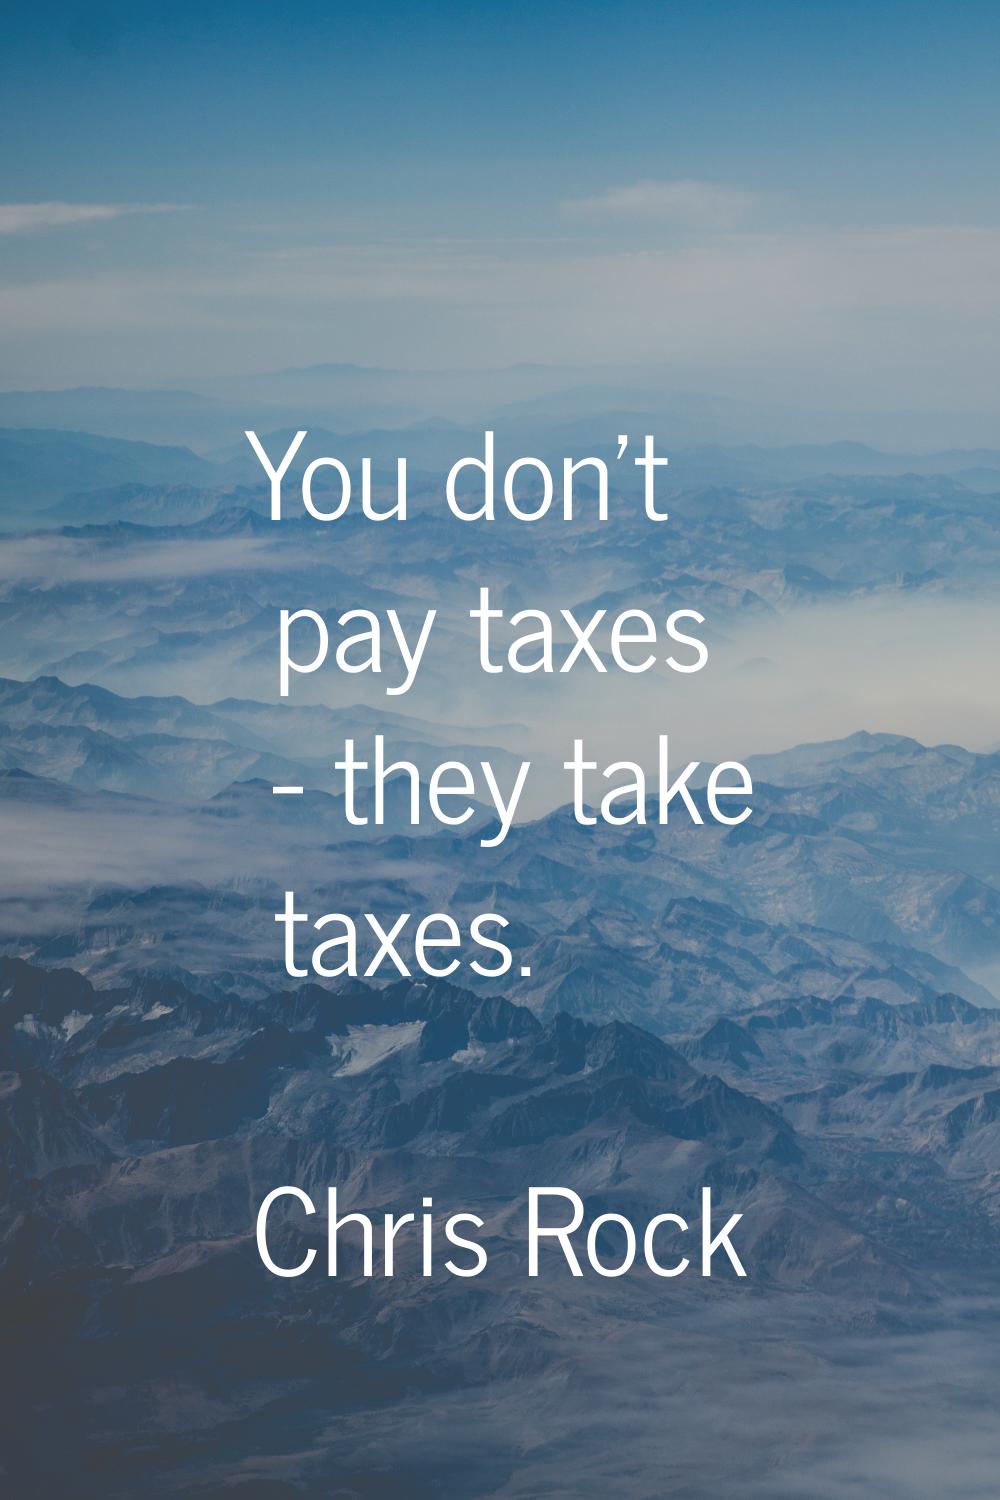 You don't pay taxes - they take taxes.